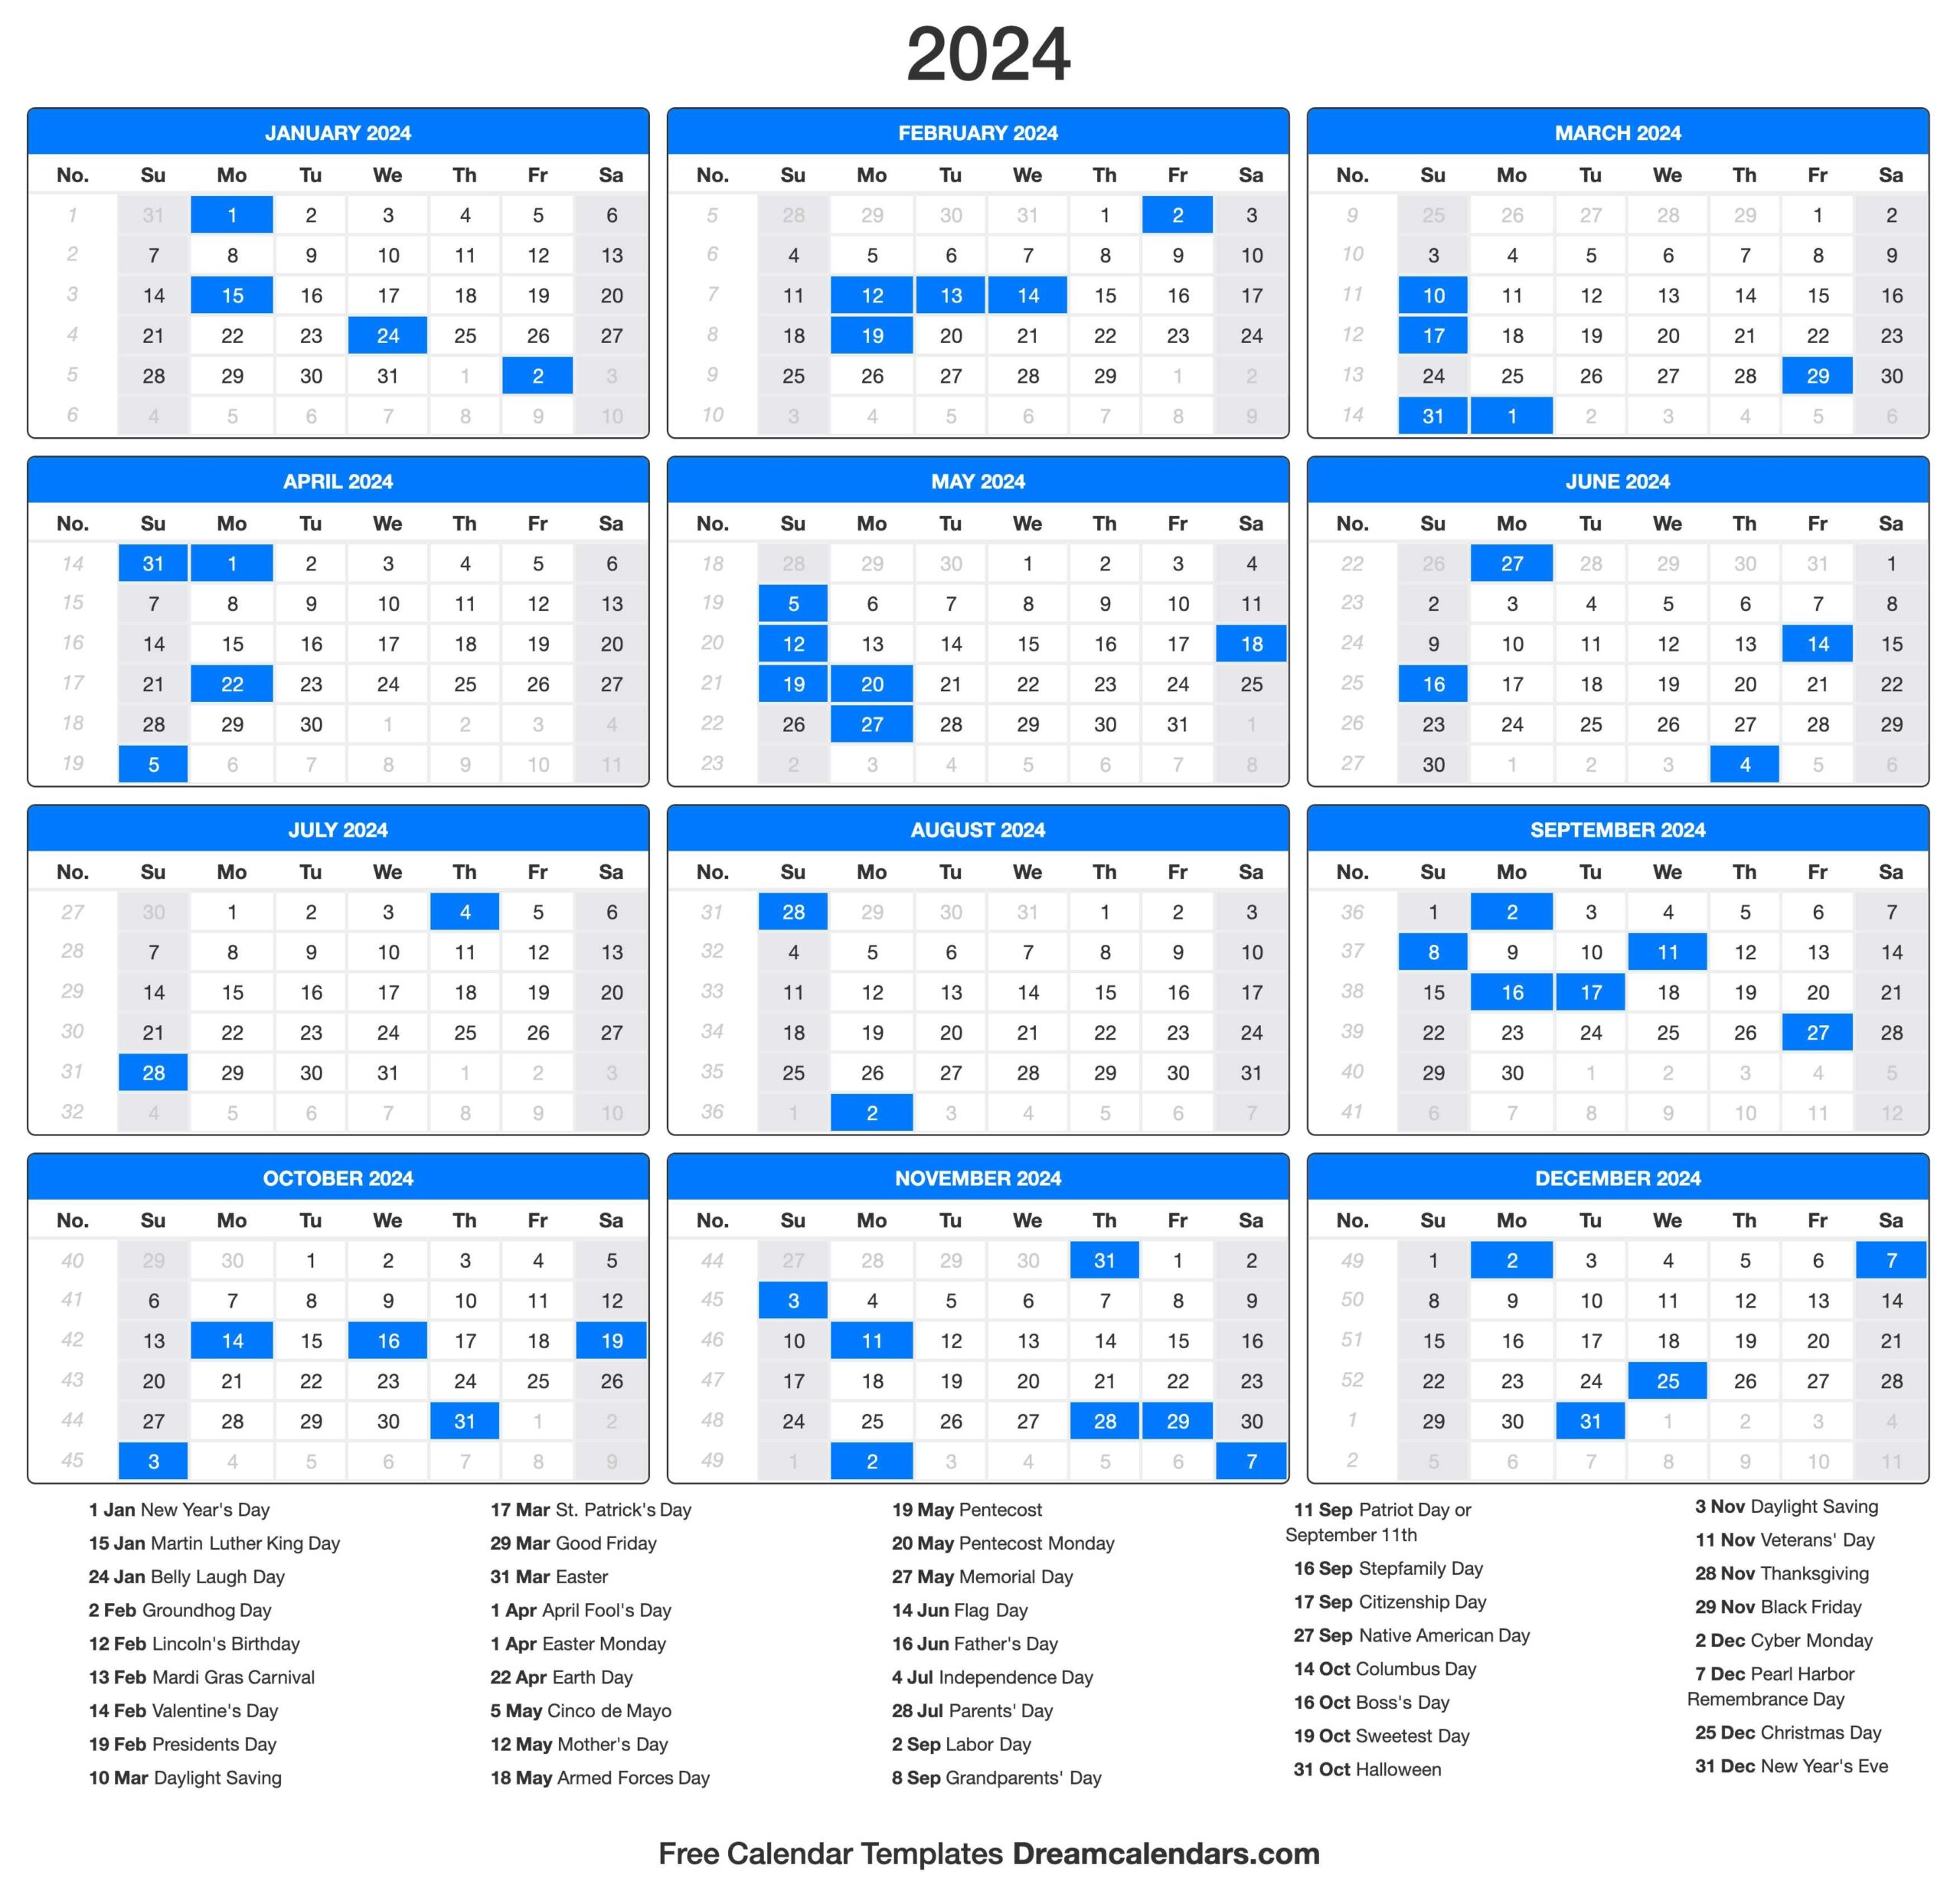 2024 Calendar - Free Printable 2024 Calendar With Holidays And Moon Phases